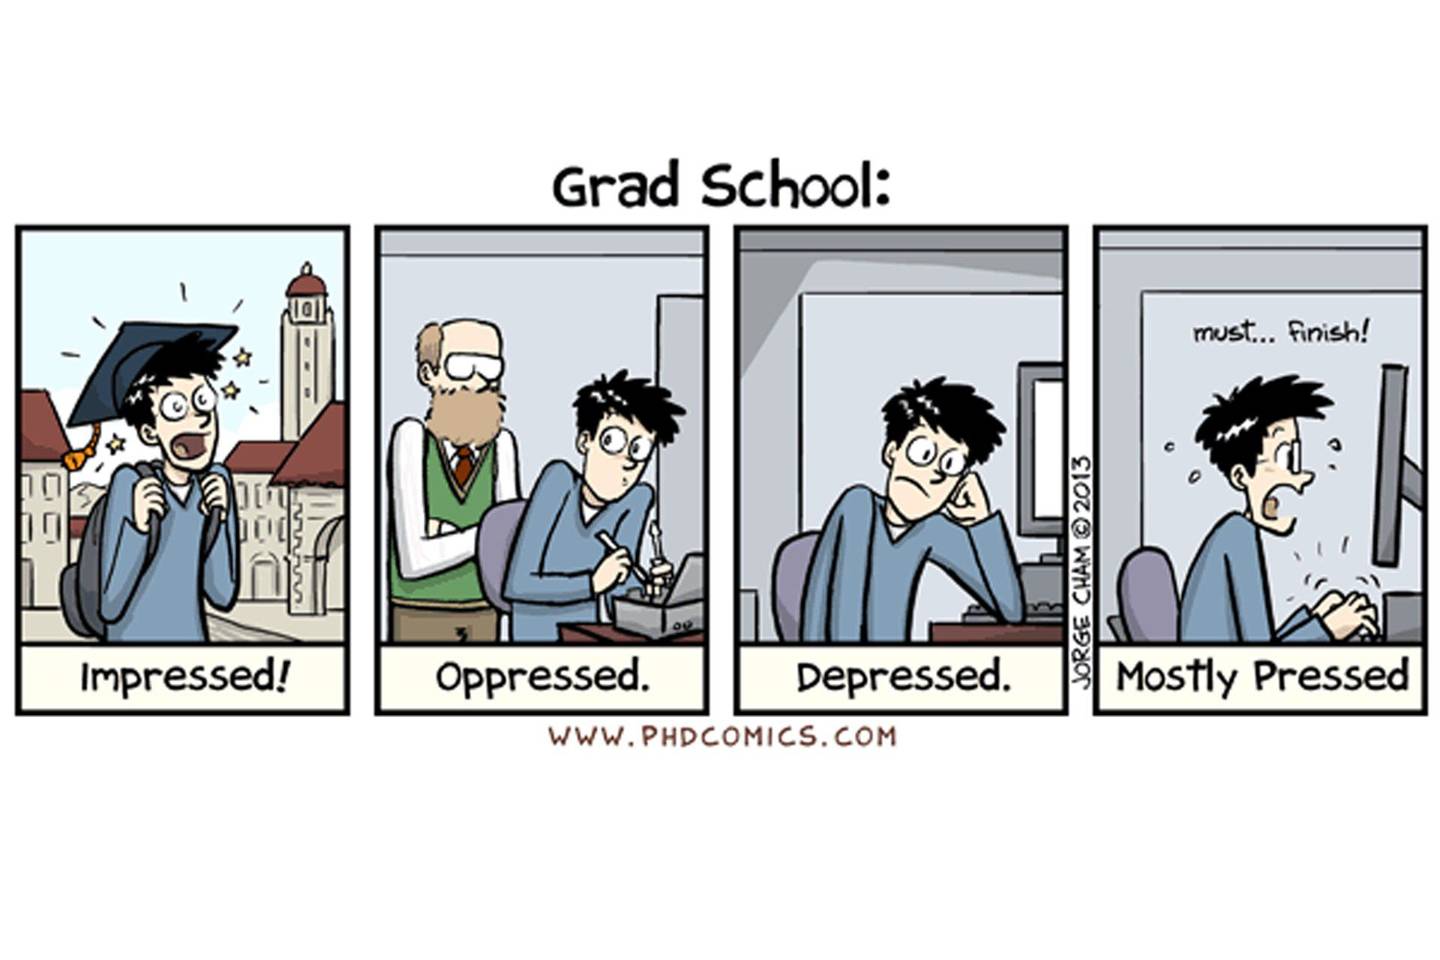 PHD Comics: The Thesis Committee